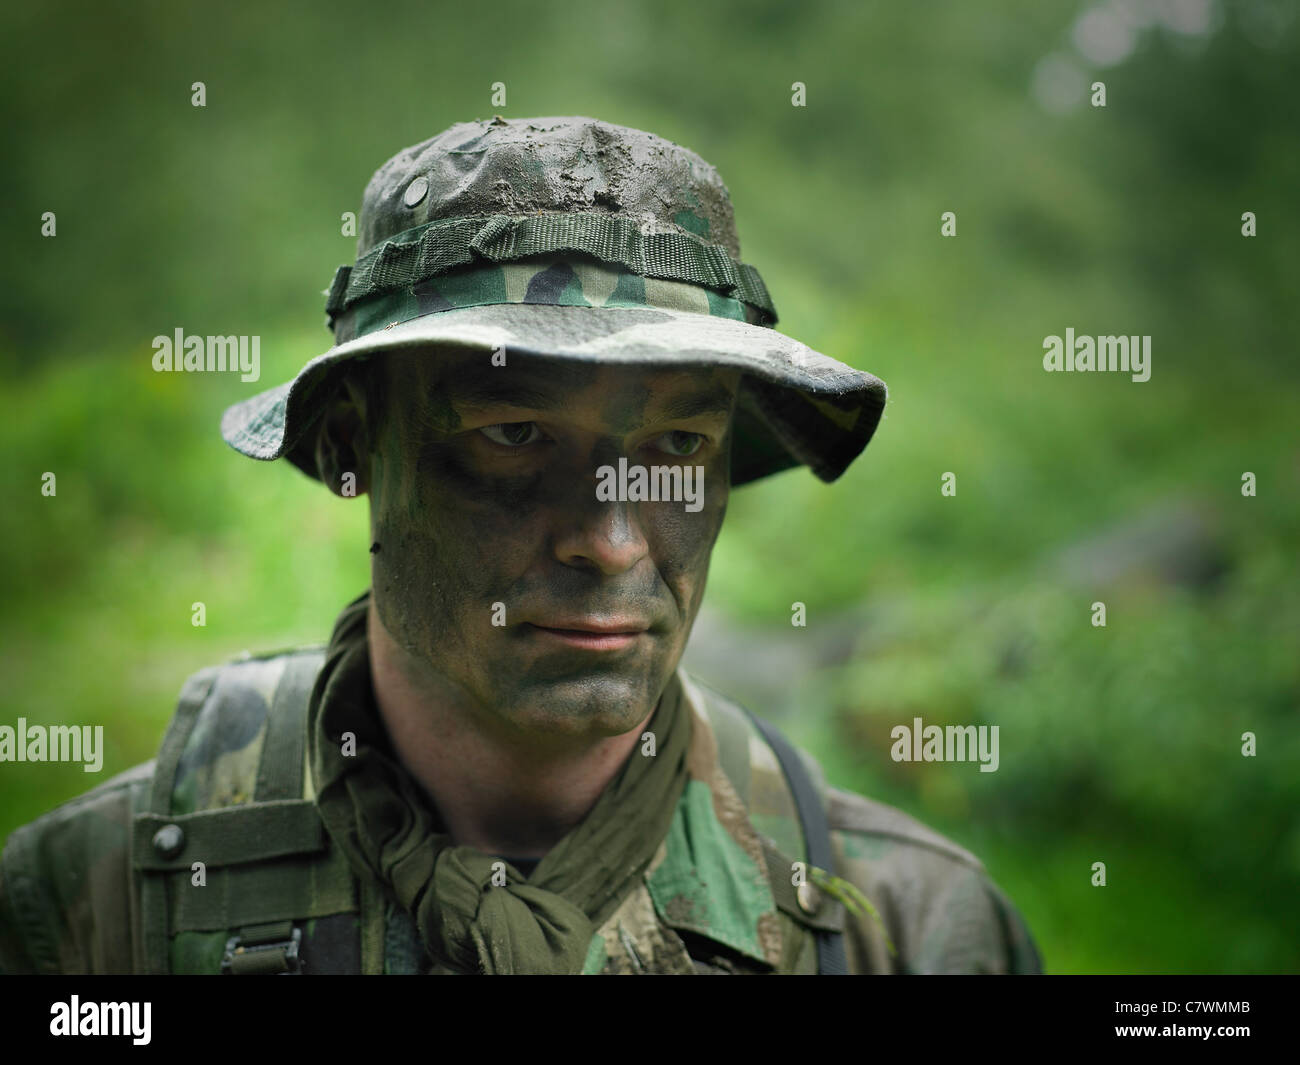 Head and shoulders view of a U.S. Special Forces soldier with camouflage face paint. Stock Photo